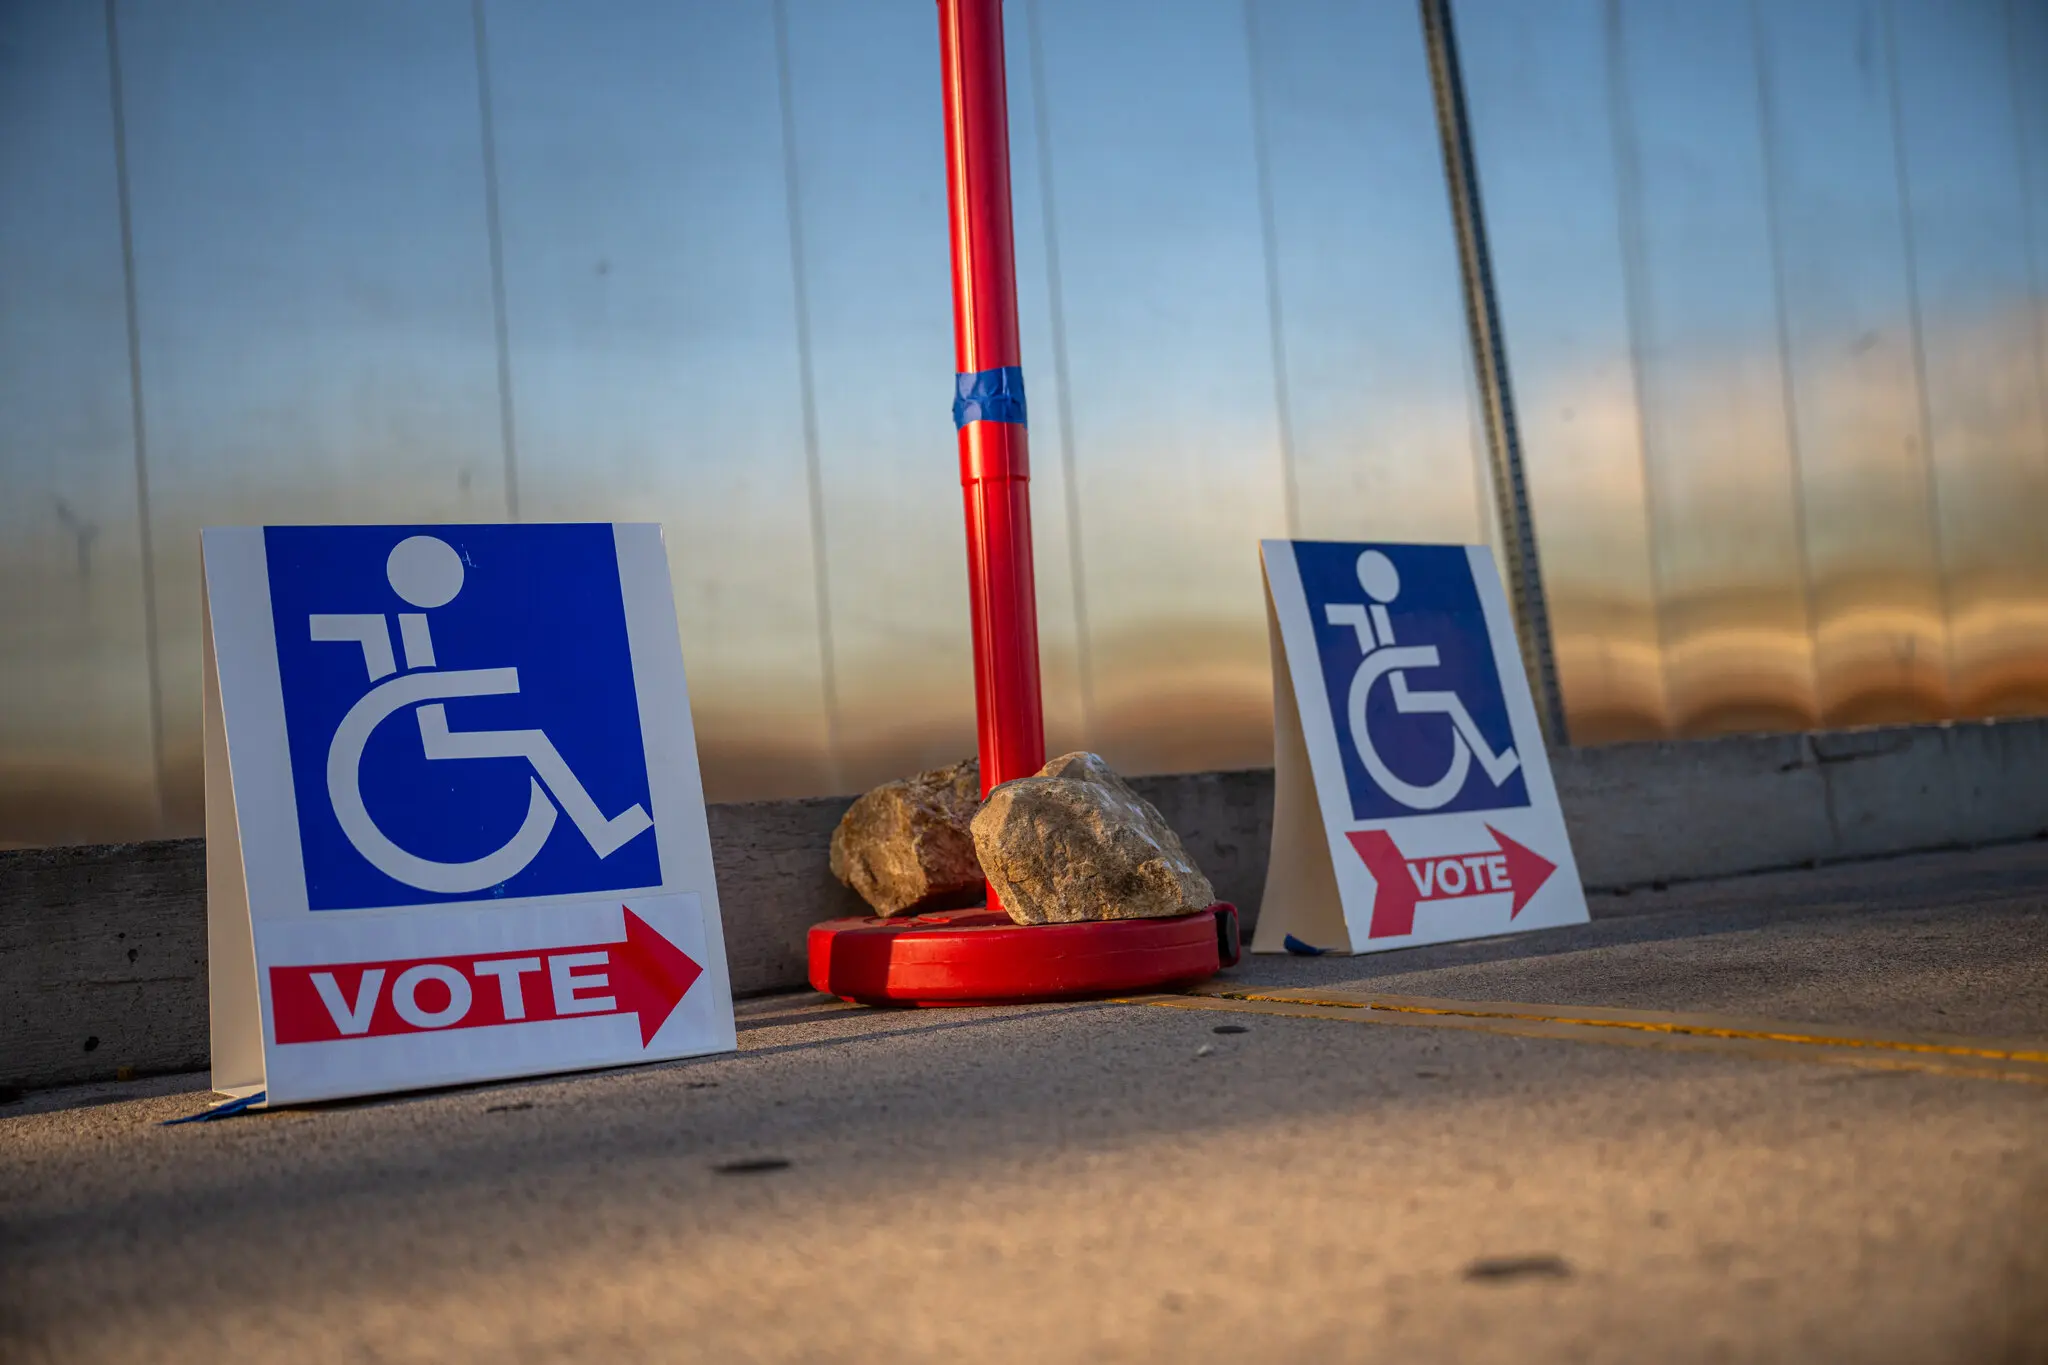 Featured image for “Elections Have Gotten More Accessible for Disabled Voters, <strong>but Gaps Remain</strong>”